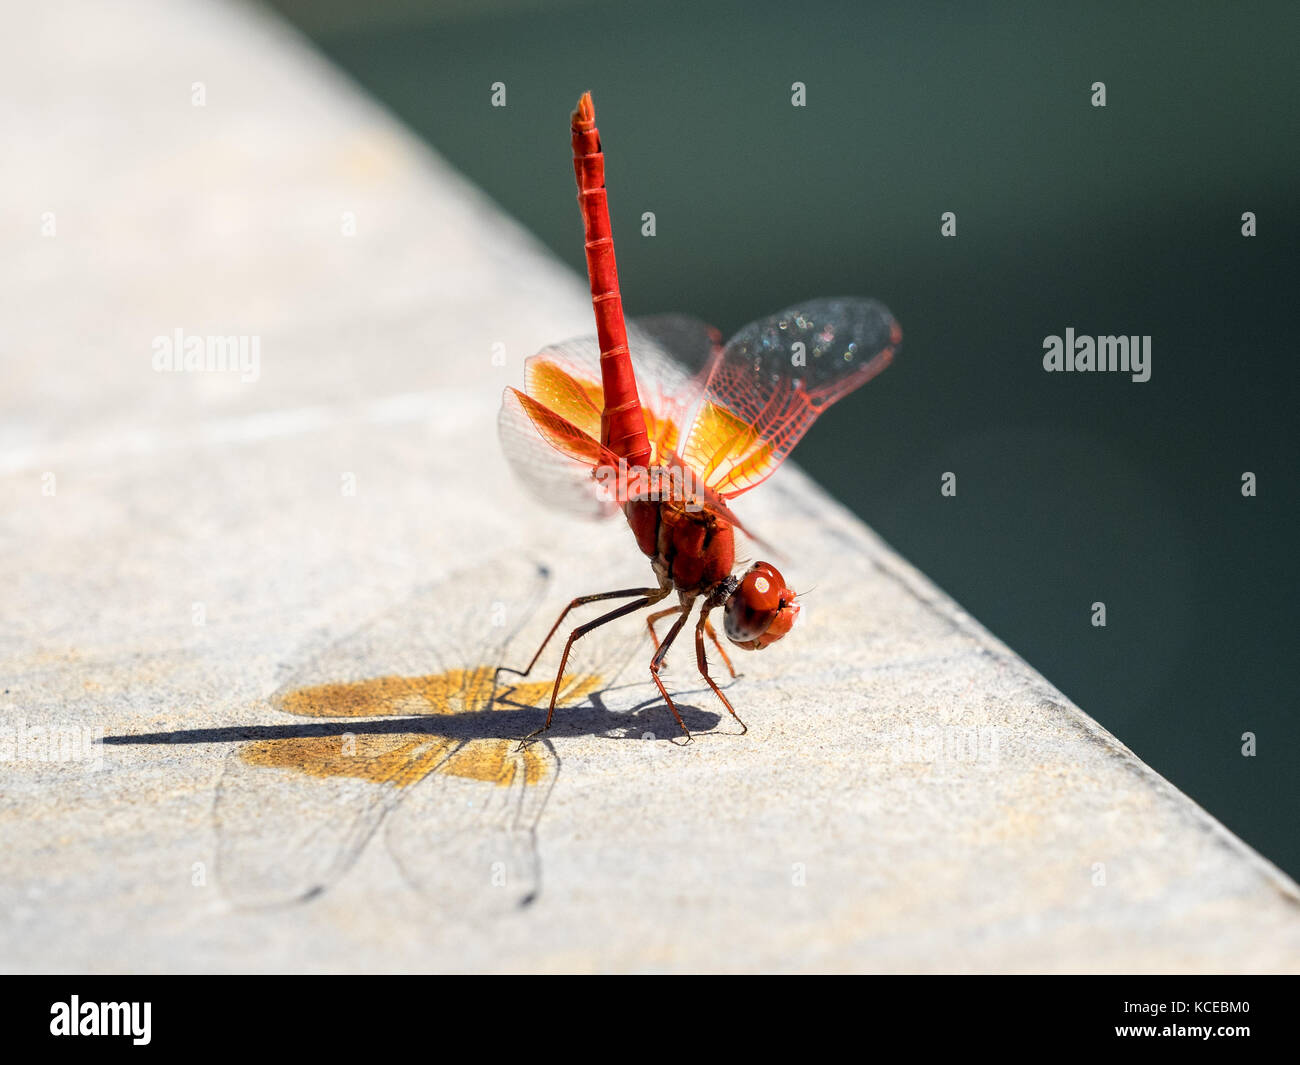 Red-veined Darter or Red-veined nomad (Sympetrum fonscolombii)  of the genus Sympetrum, resting at a poolside in Valencia, Spain Stock Photo